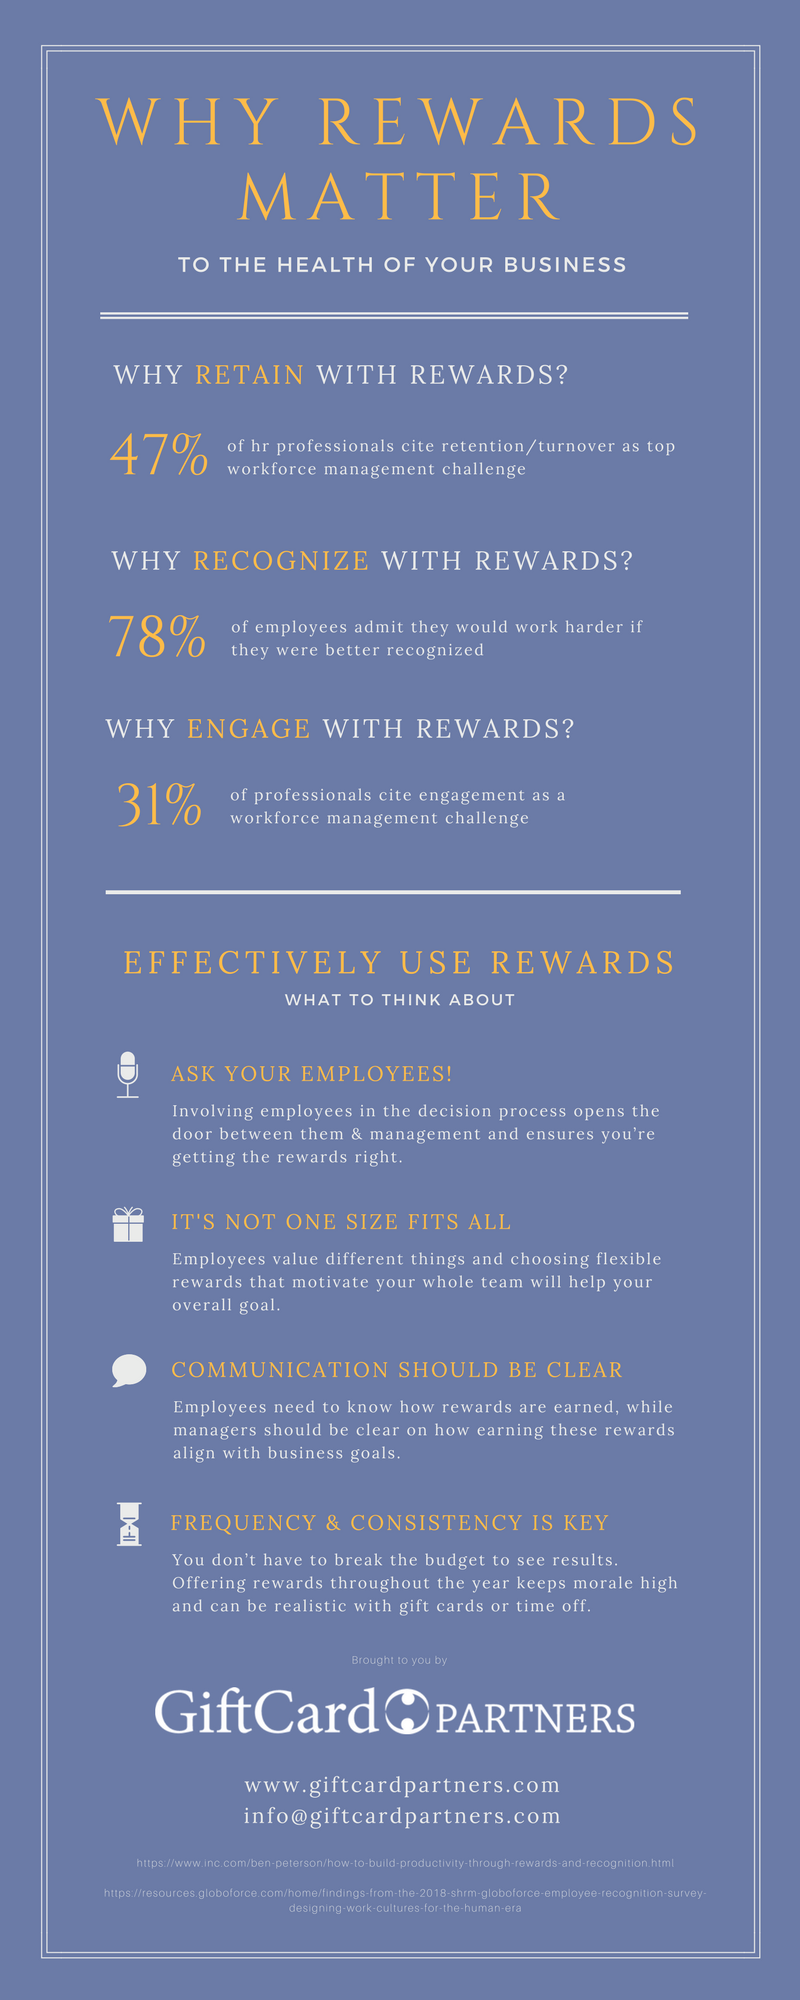 Why Rewards Matter to the Health of Your Business - Infographic